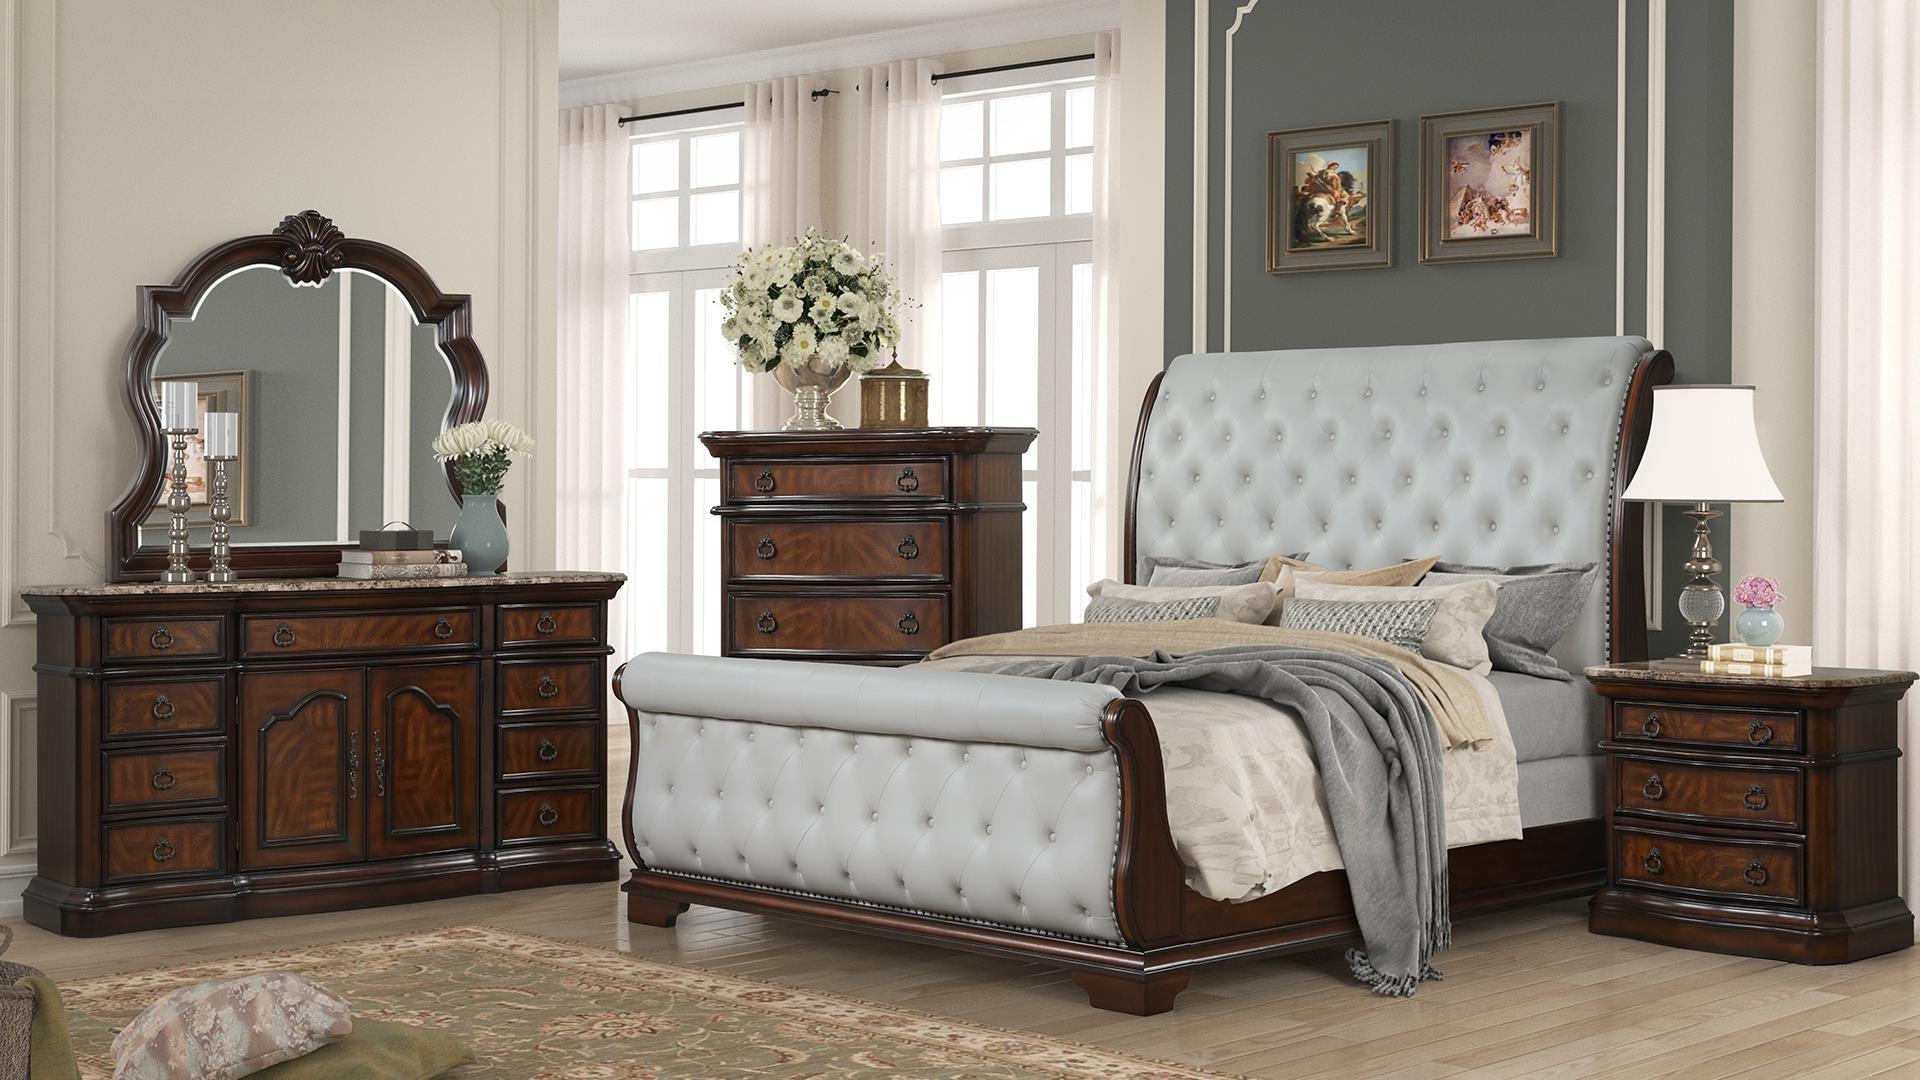 Classic, Traditional Sleigh Bedroom Set MONTAGE MONTAGE-Q-NDMC-5PC in Walnut, White Fabric